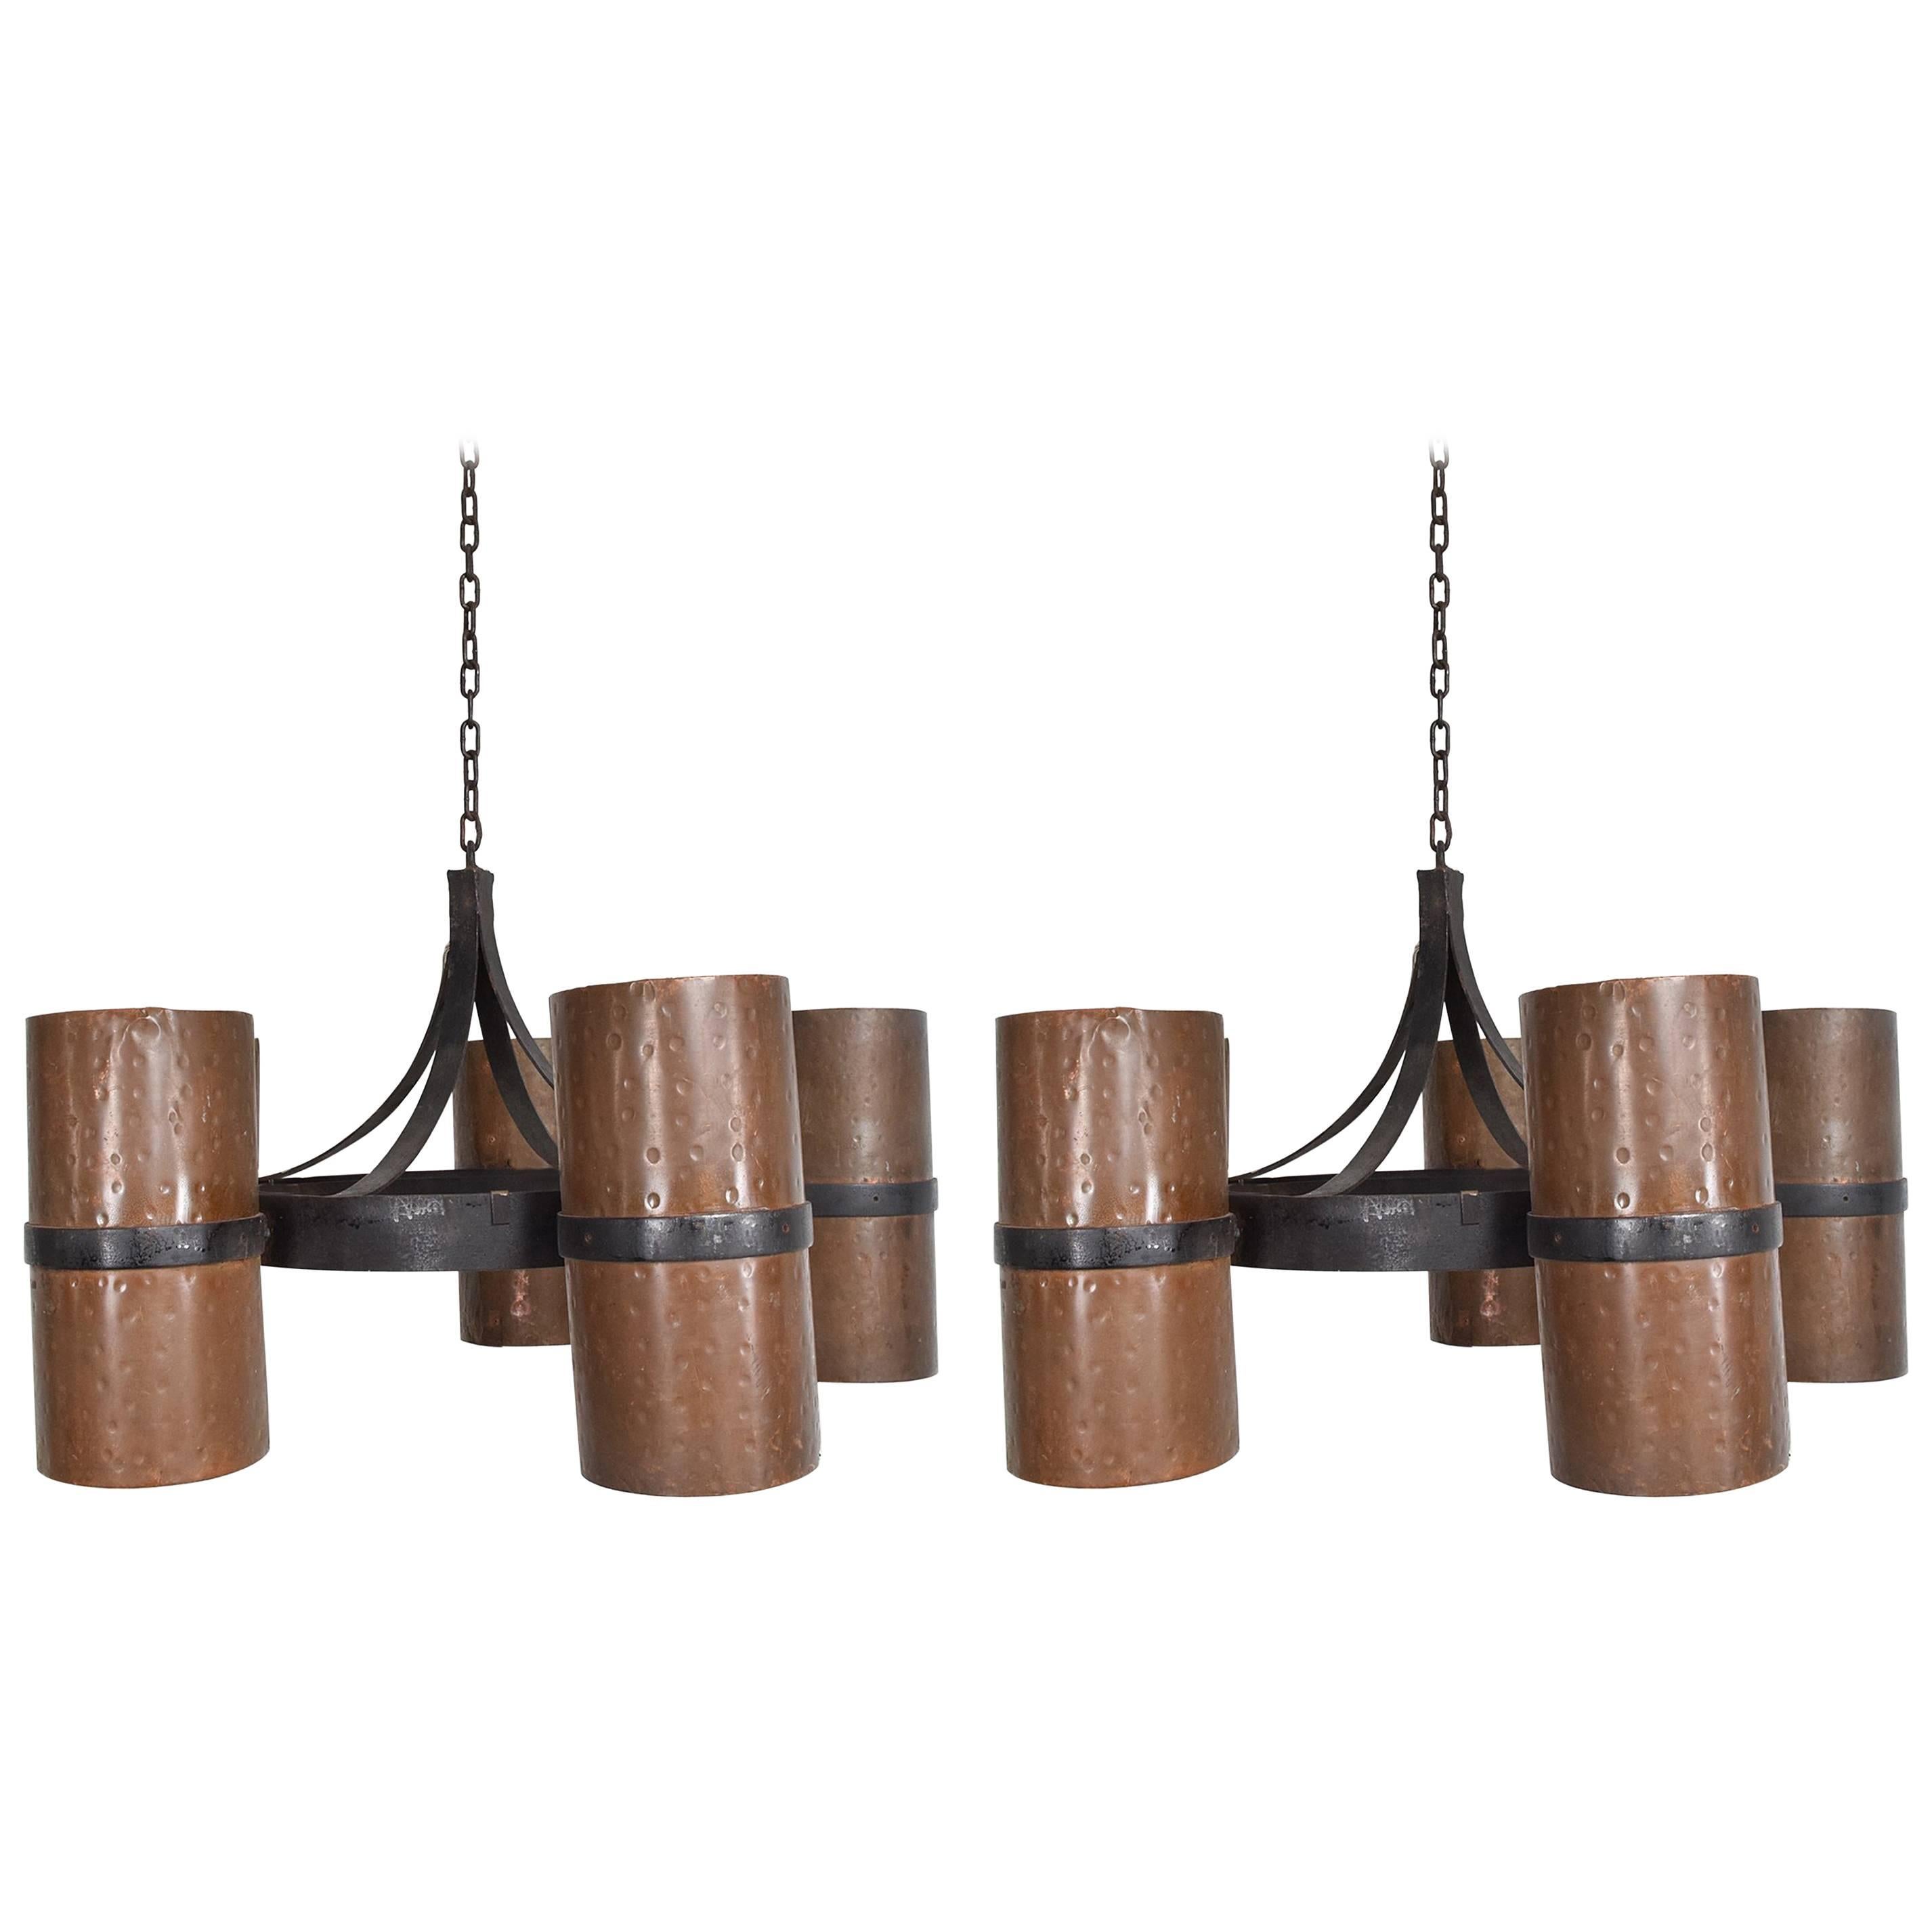 Pair of Hanging Light Fixtures Iron and Copper, Modernist Brutalist